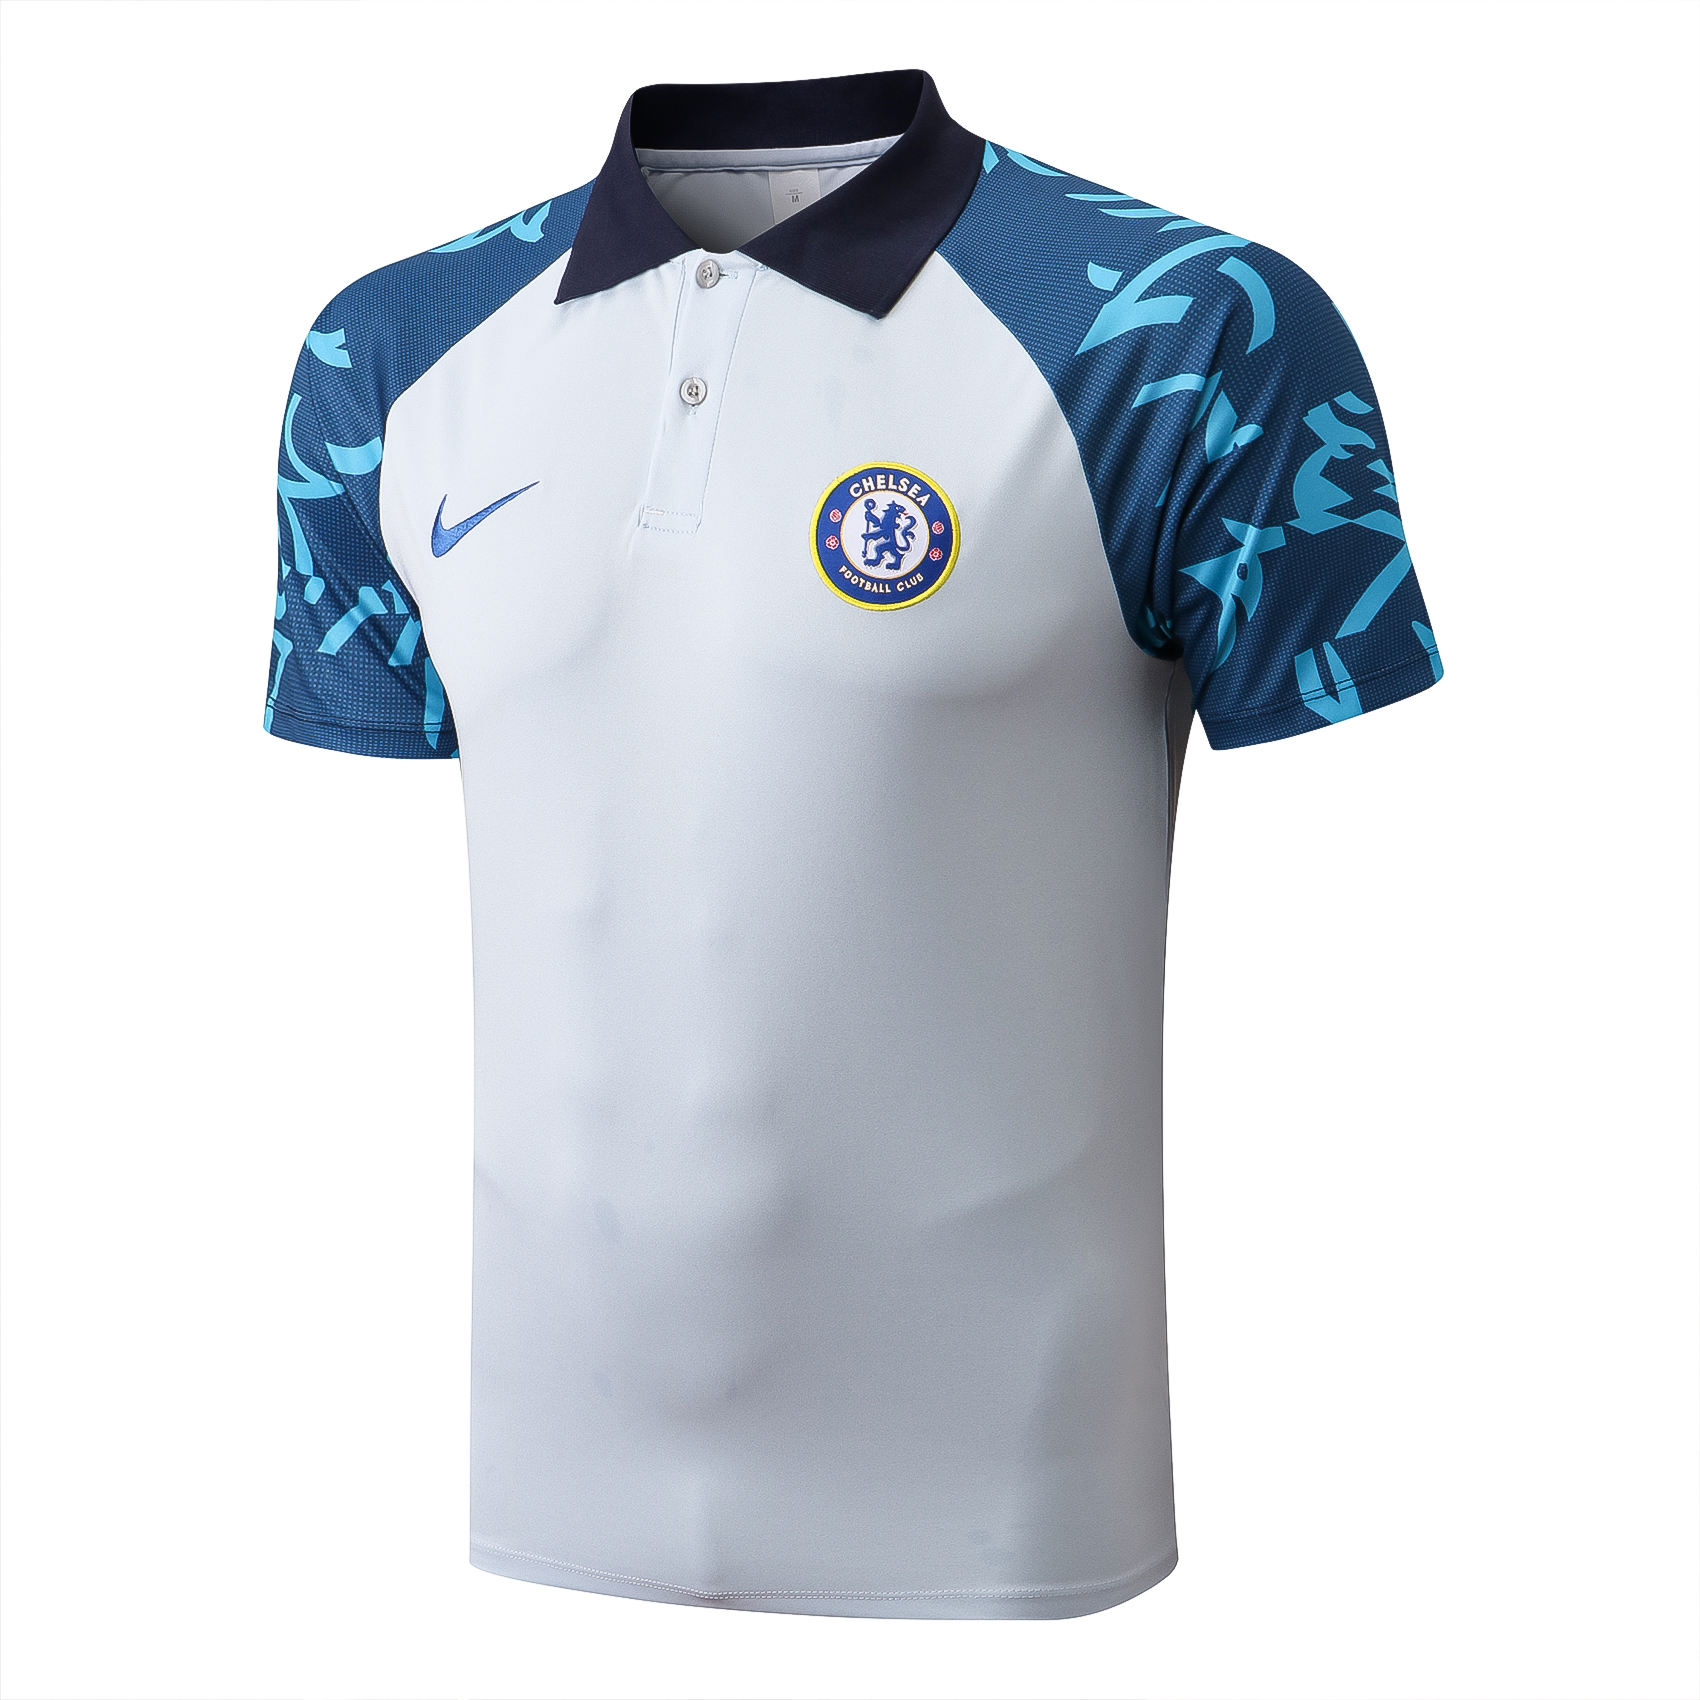 Chelsea POLO Shirt Football Jersey Soccer Clothes 22/23 WHITE NIKE